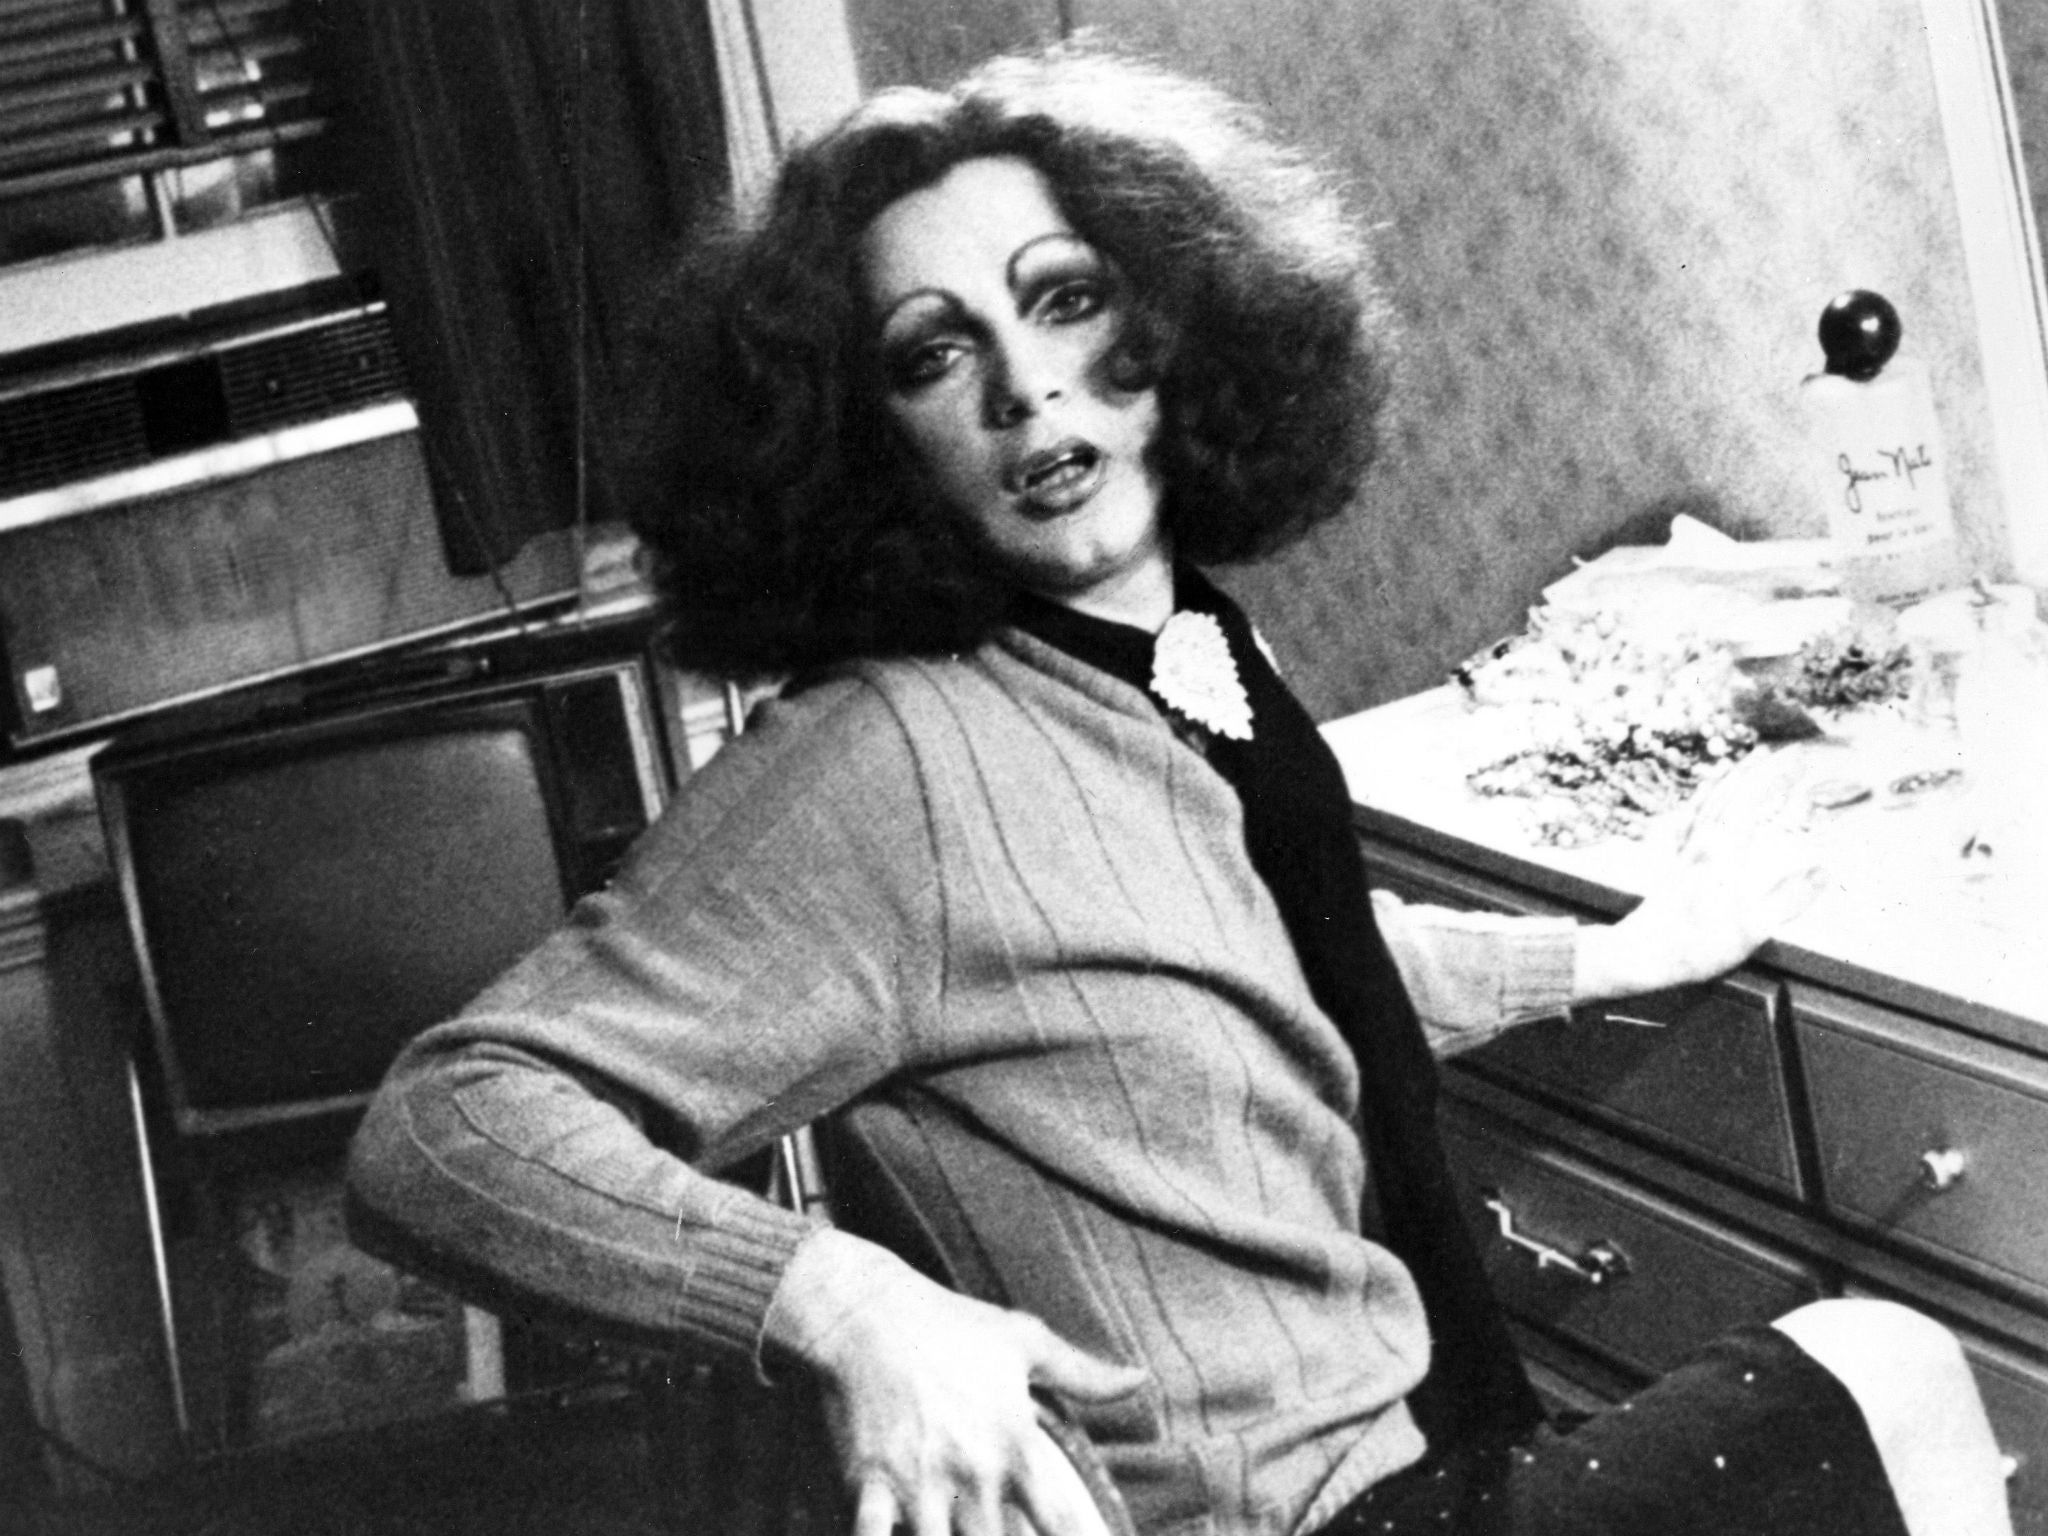 Holly Woodlawn Dead Transgender Actress And Inspiration Behind Lou Reed Song Dies Aged 69 The